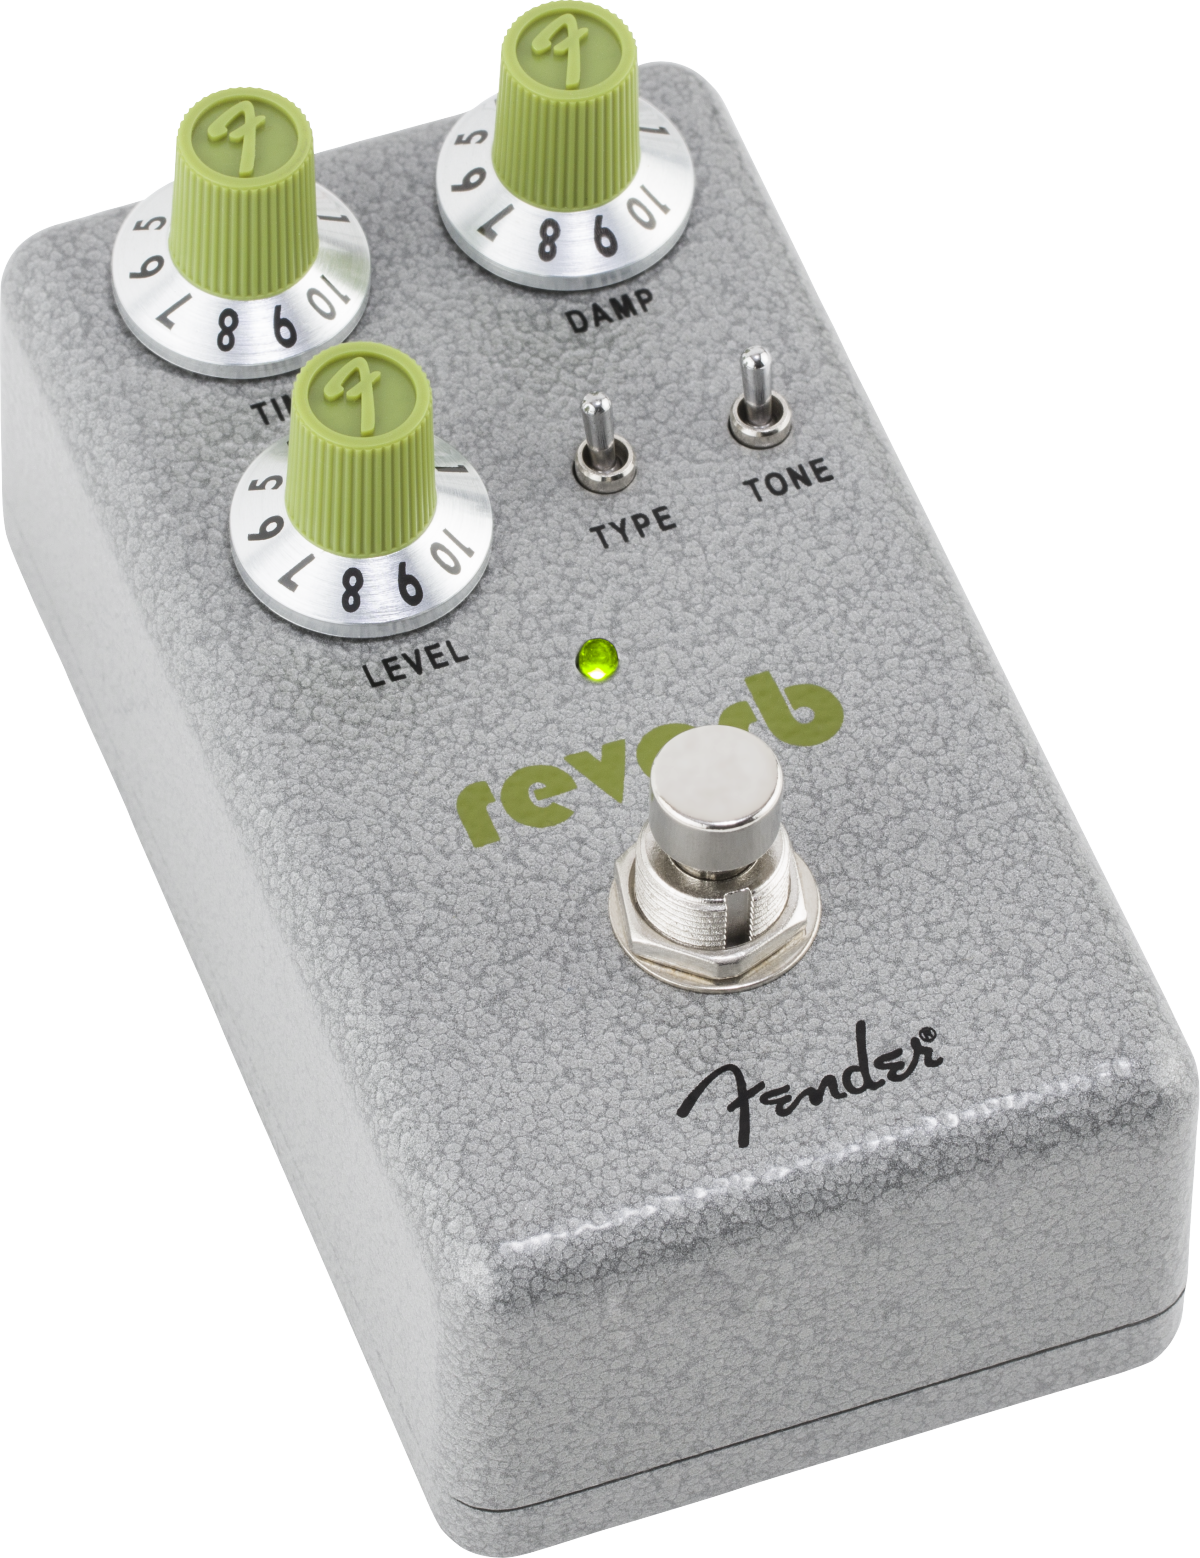 Fender Hammertone Reverb - Reverb/delay/echo effect pedaal - Main picture